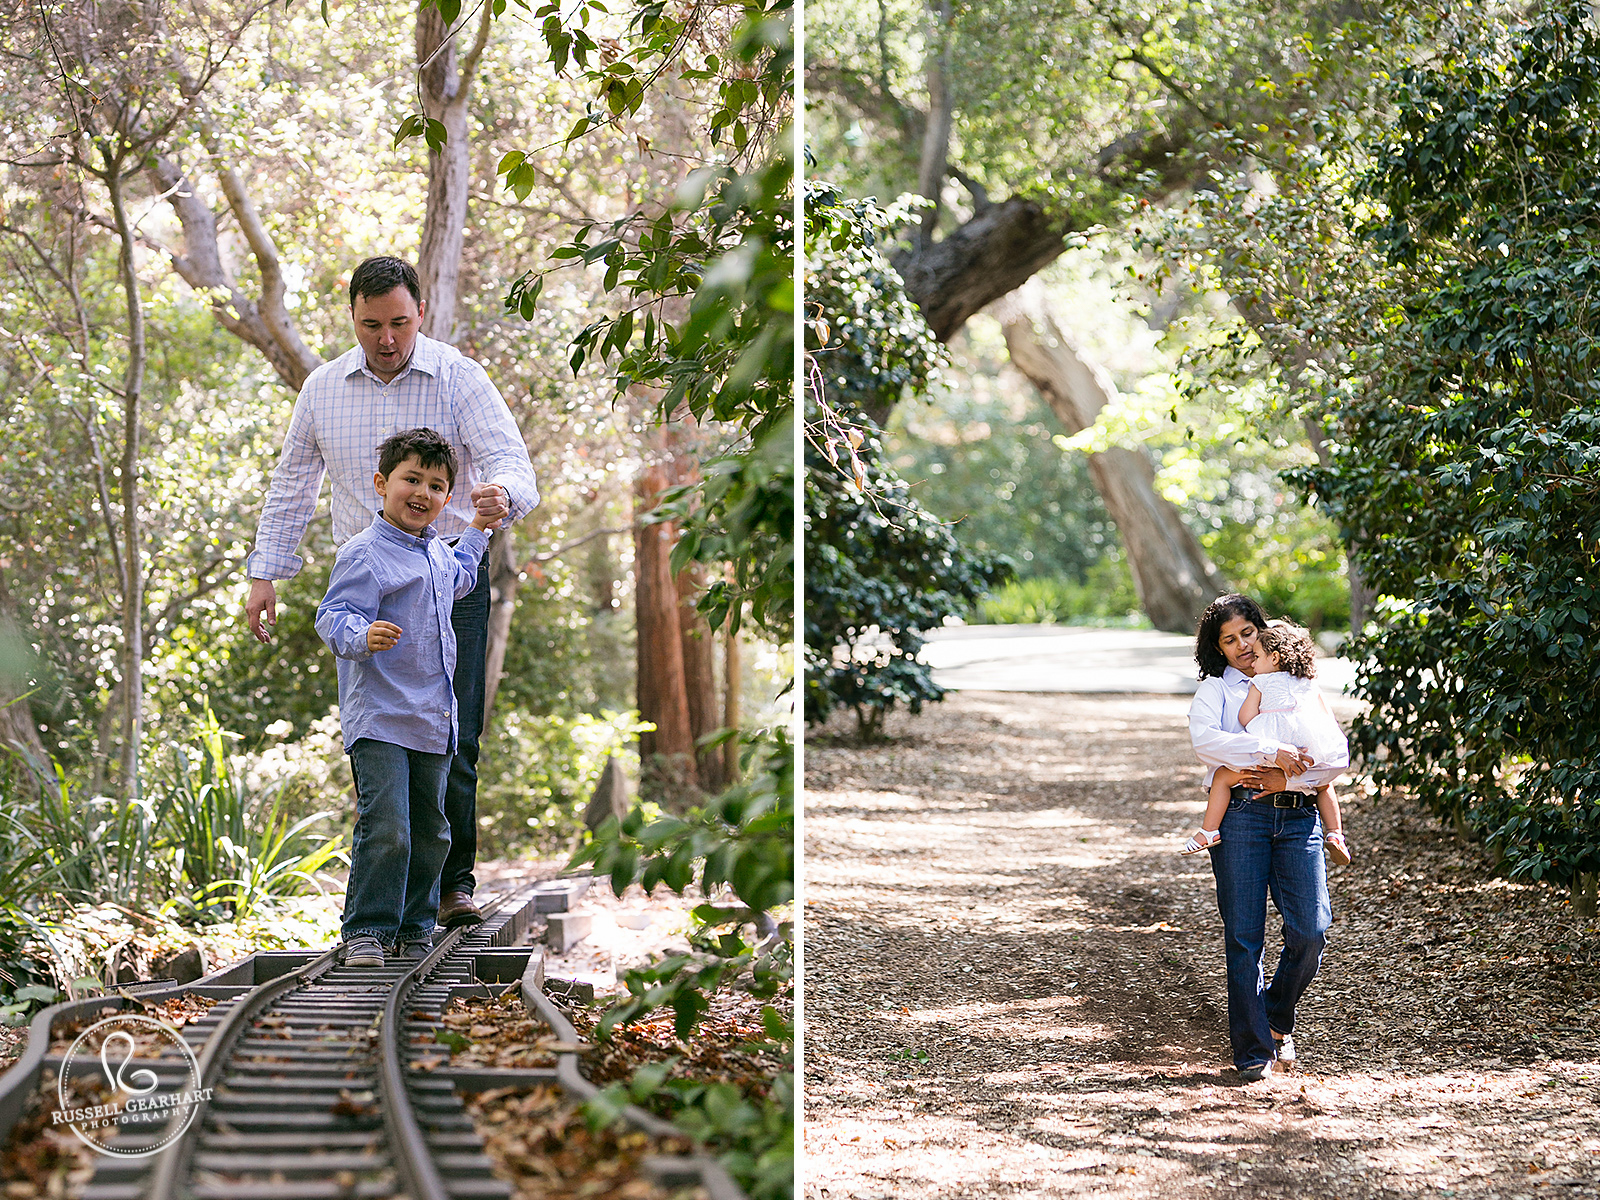 Monrovia Family Portrait – Russell Gearhart Photography – www.gearhartphoto.com